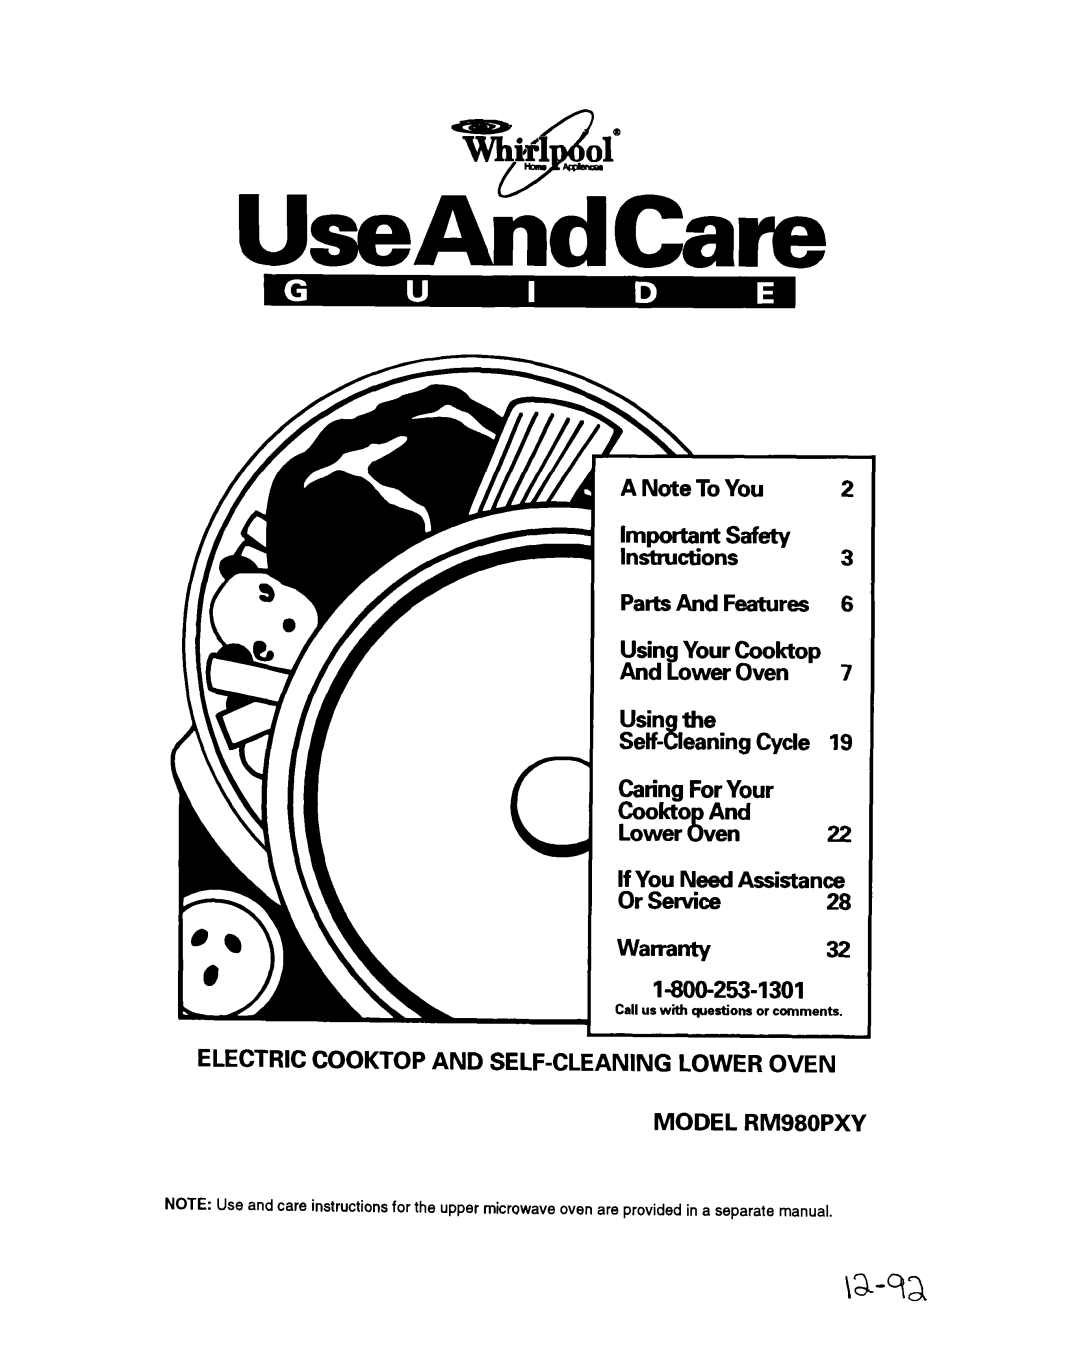 Whirlpool warranty UseAndCare, Y&fN of, Usin the Setf-!Ieaning Cycle Caring For Your, MODEL RM980PXY 